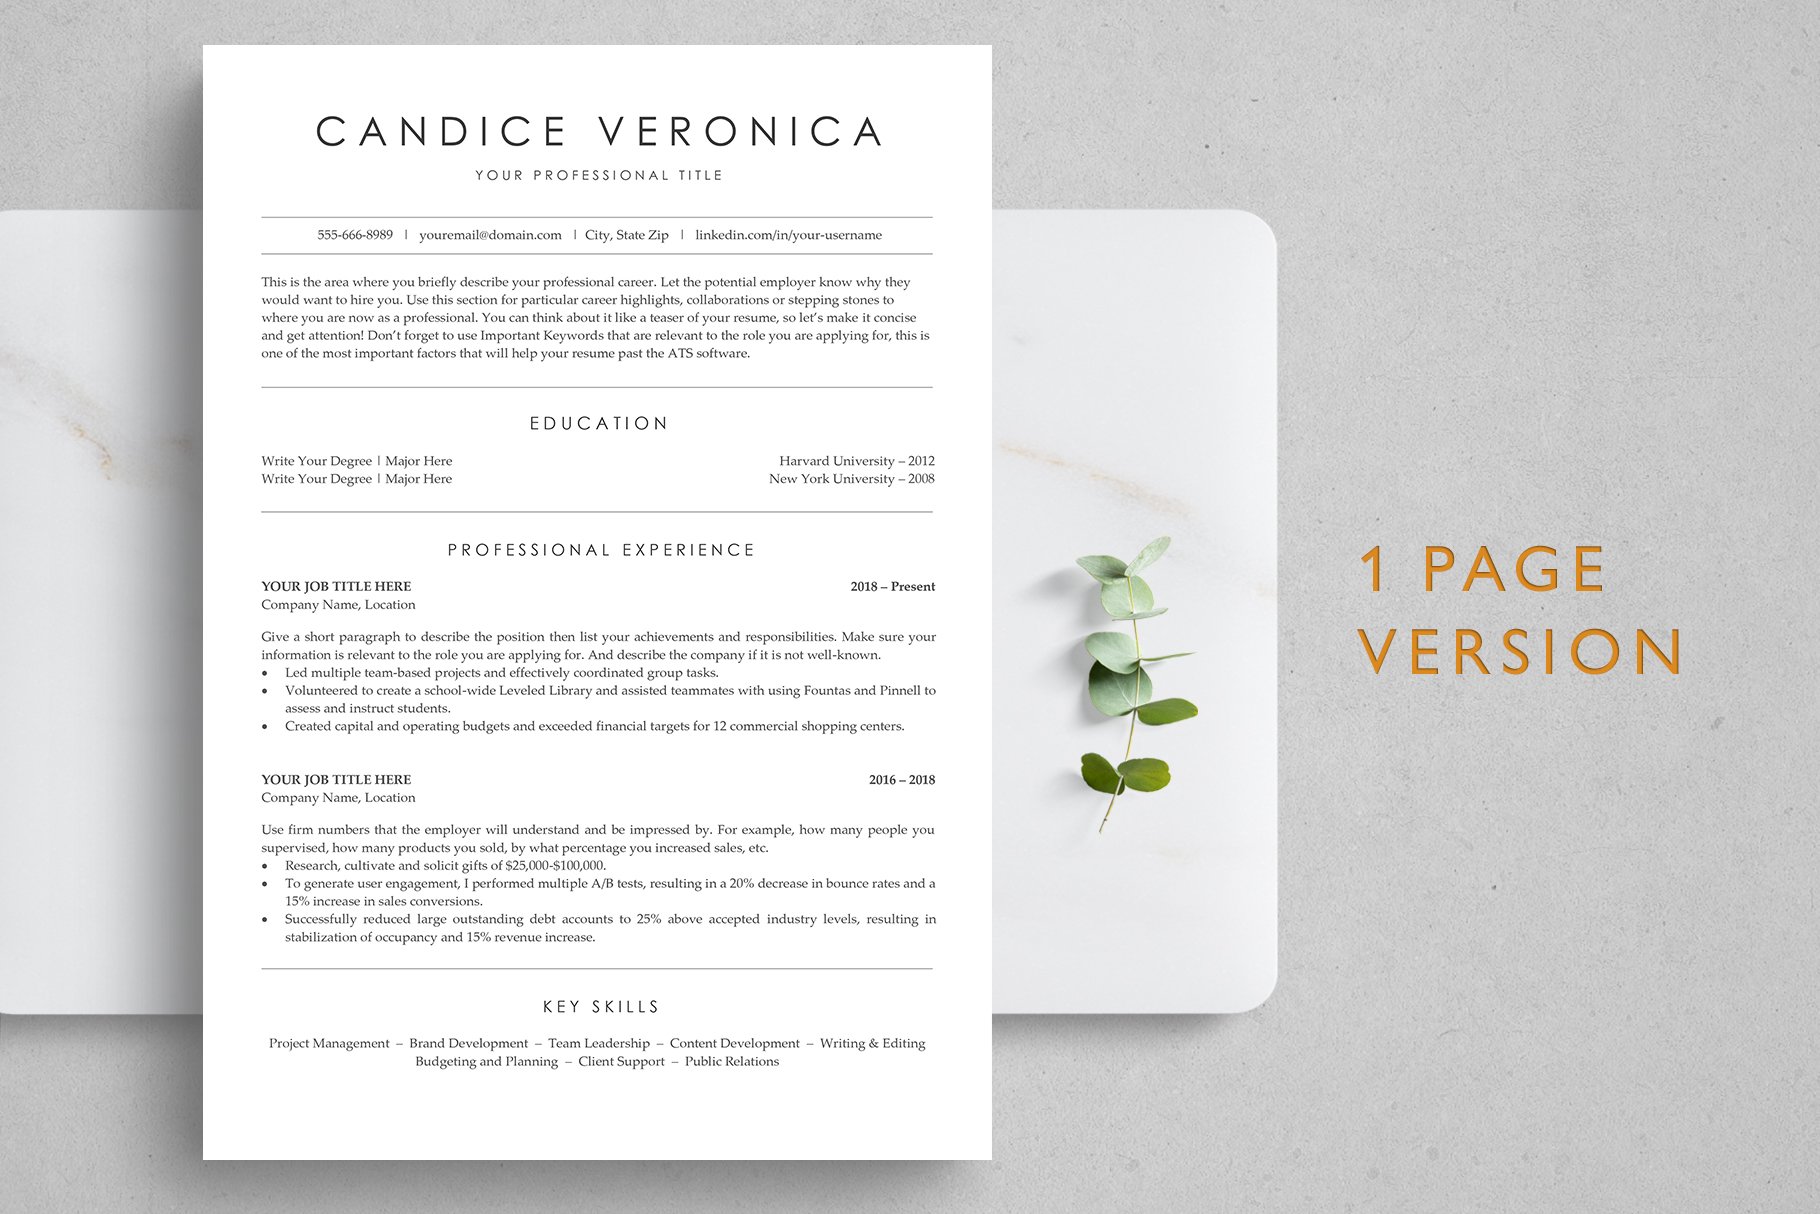 ATS Resume Template - CANDICE preview image.